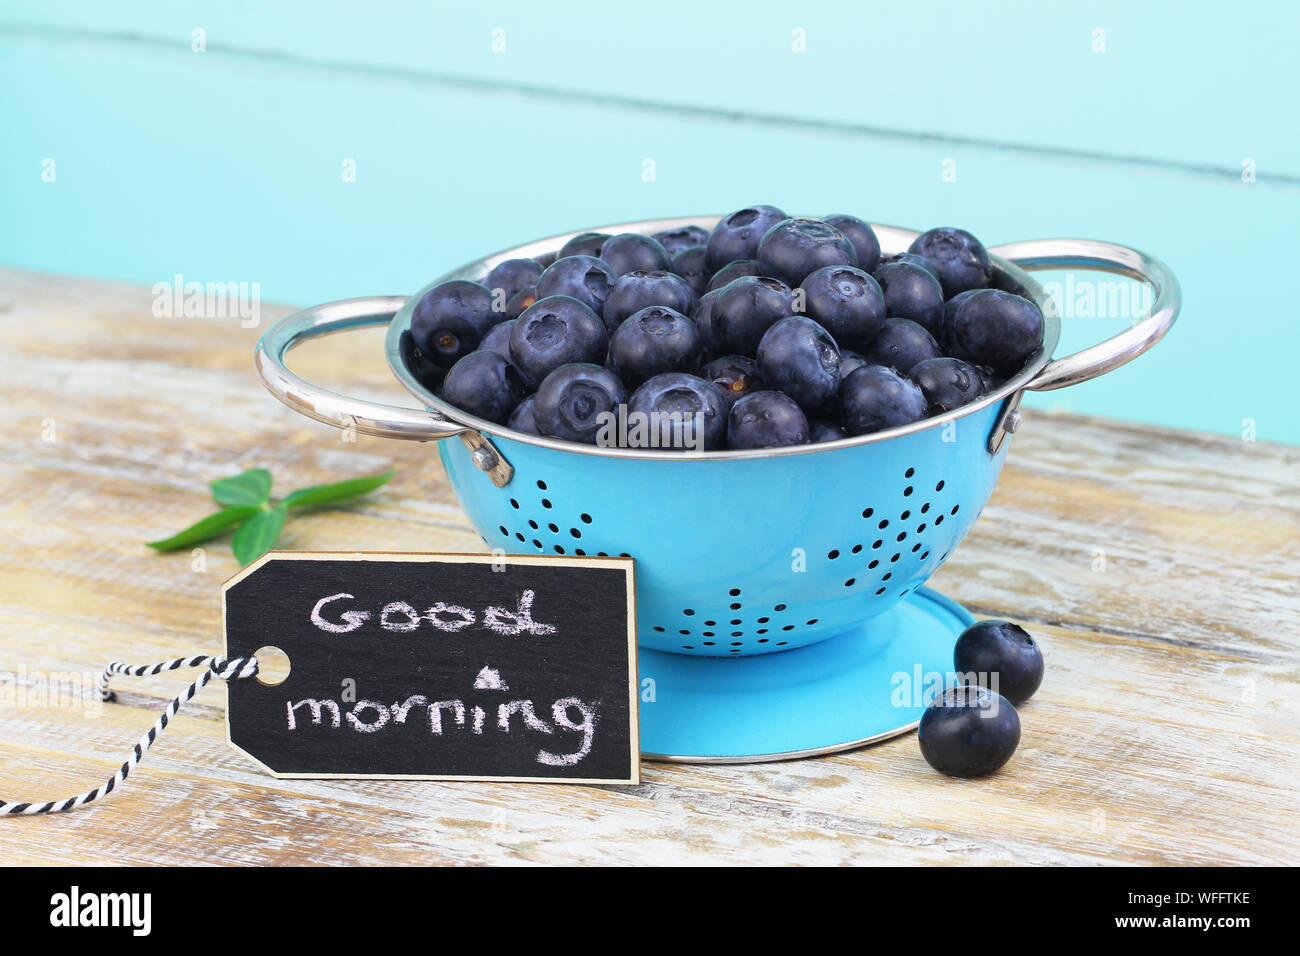 Good morning card with blue colander full of fresh blueberries Stock Photo